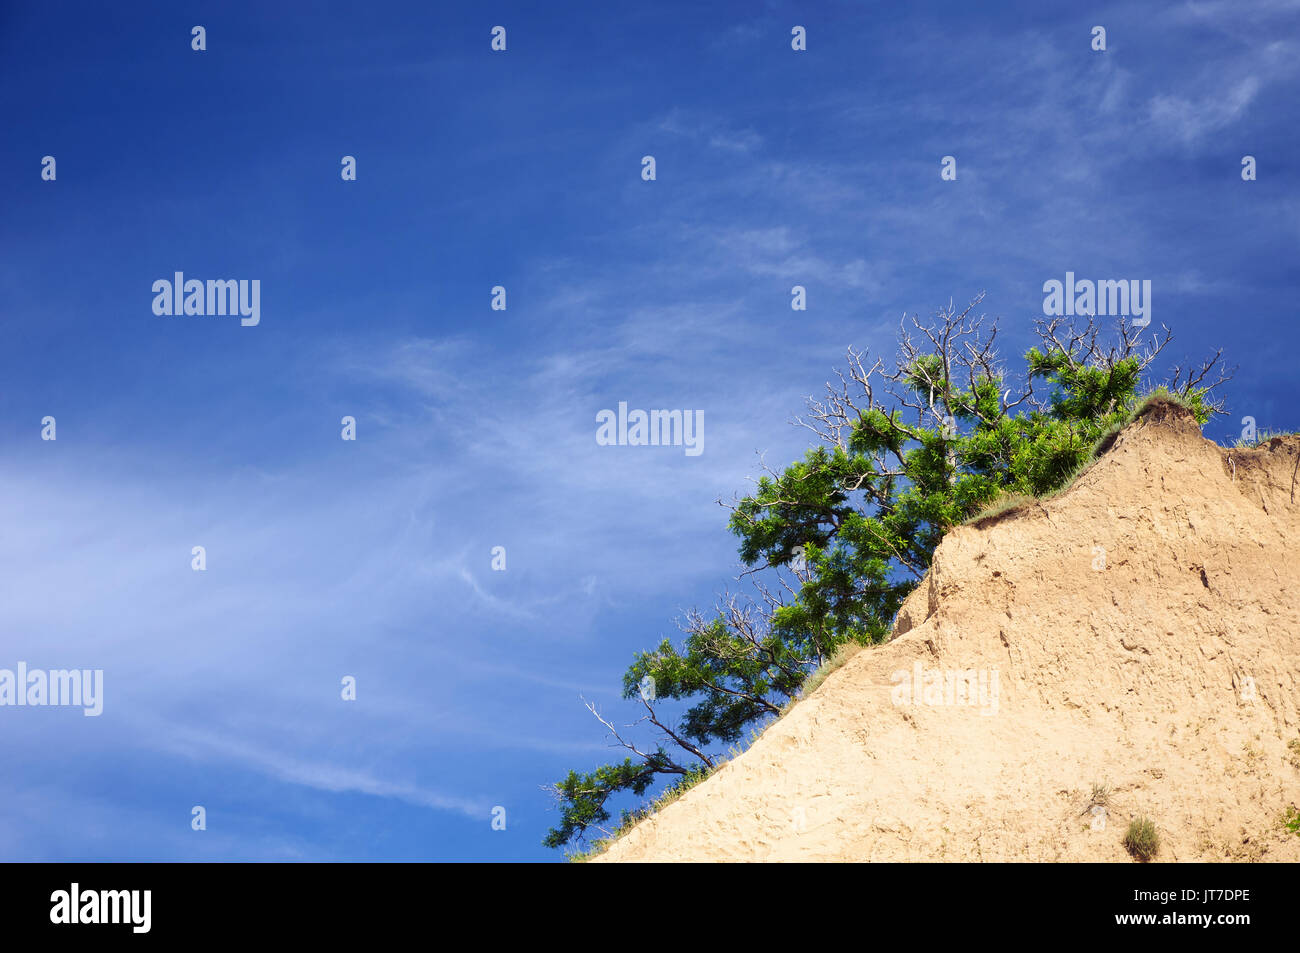 Clear blue sky over cliff peak with a tree Stock Photo